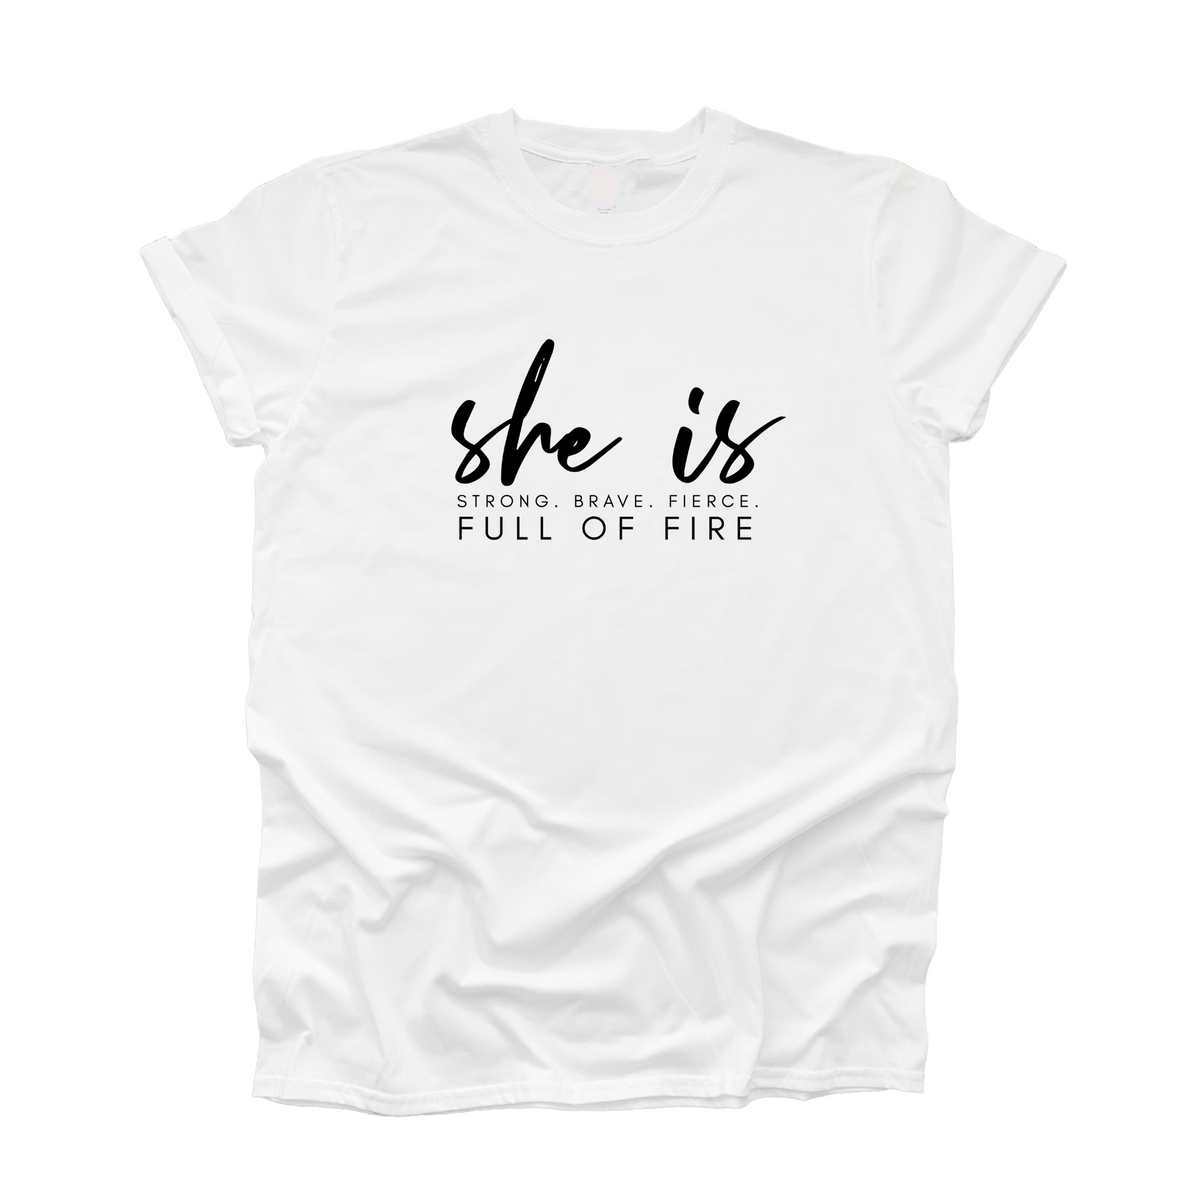 She is - T-shirt